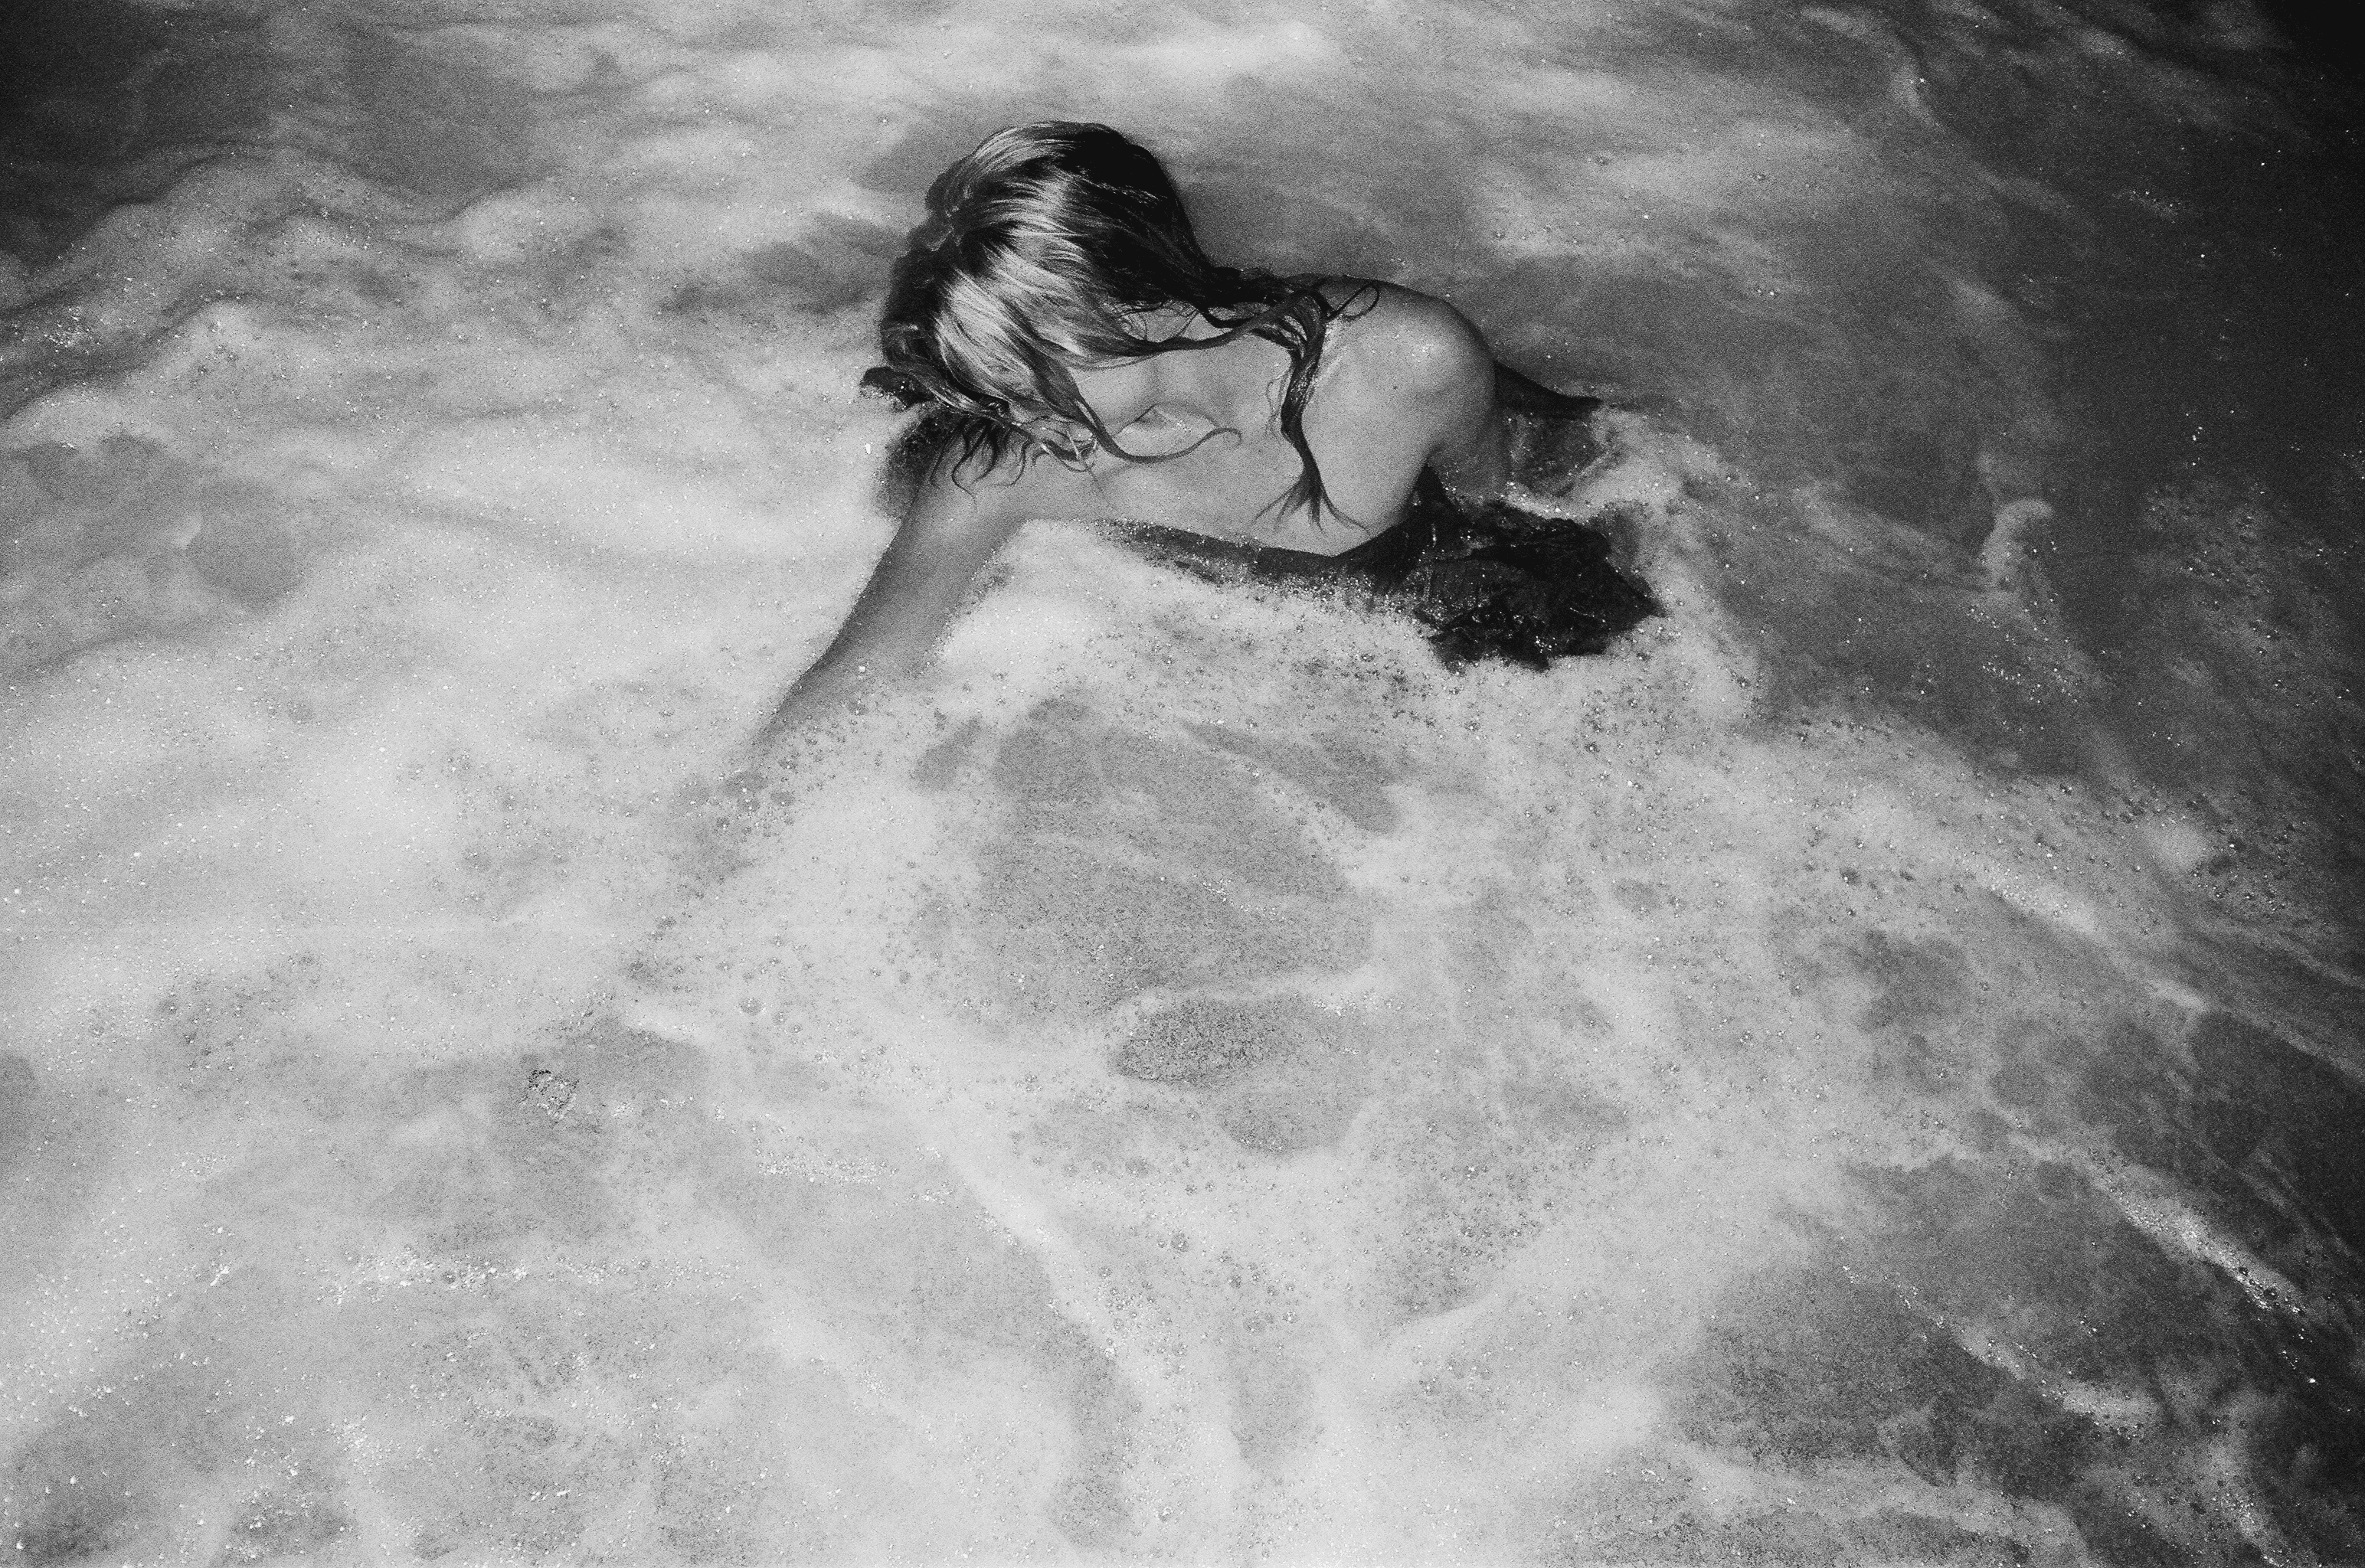 Sometimes Forever - Girl in Pool at Le Bain